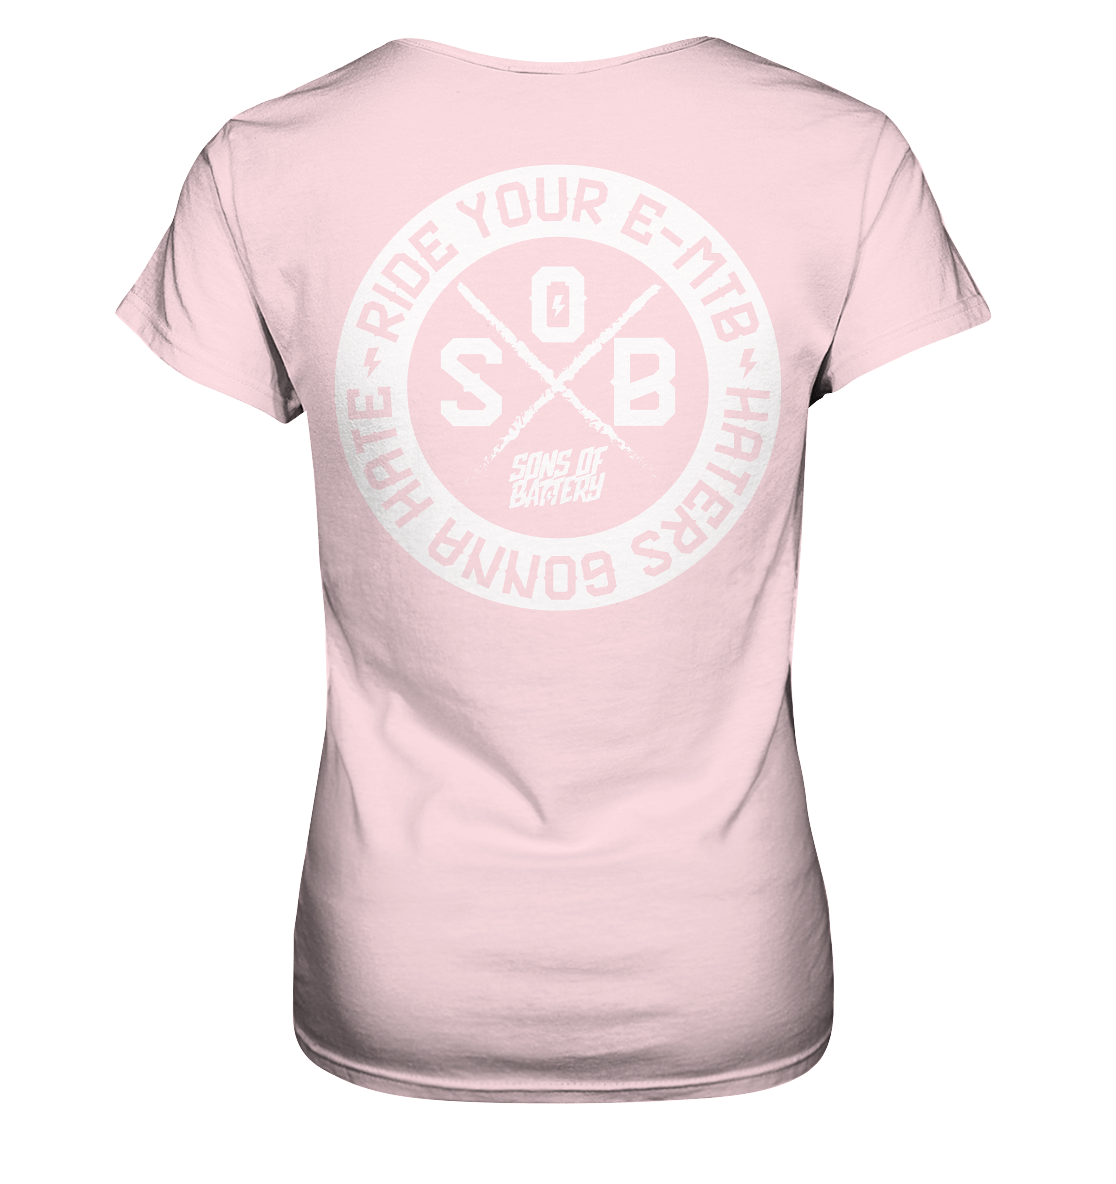 Sons of Battery® - E-MTB Brand & Community Lady-Shirts Orchid Pink / XS Haters gonna Hate - Ladies Premium Shirt (Ohne Flip Label) E-Bike-Community